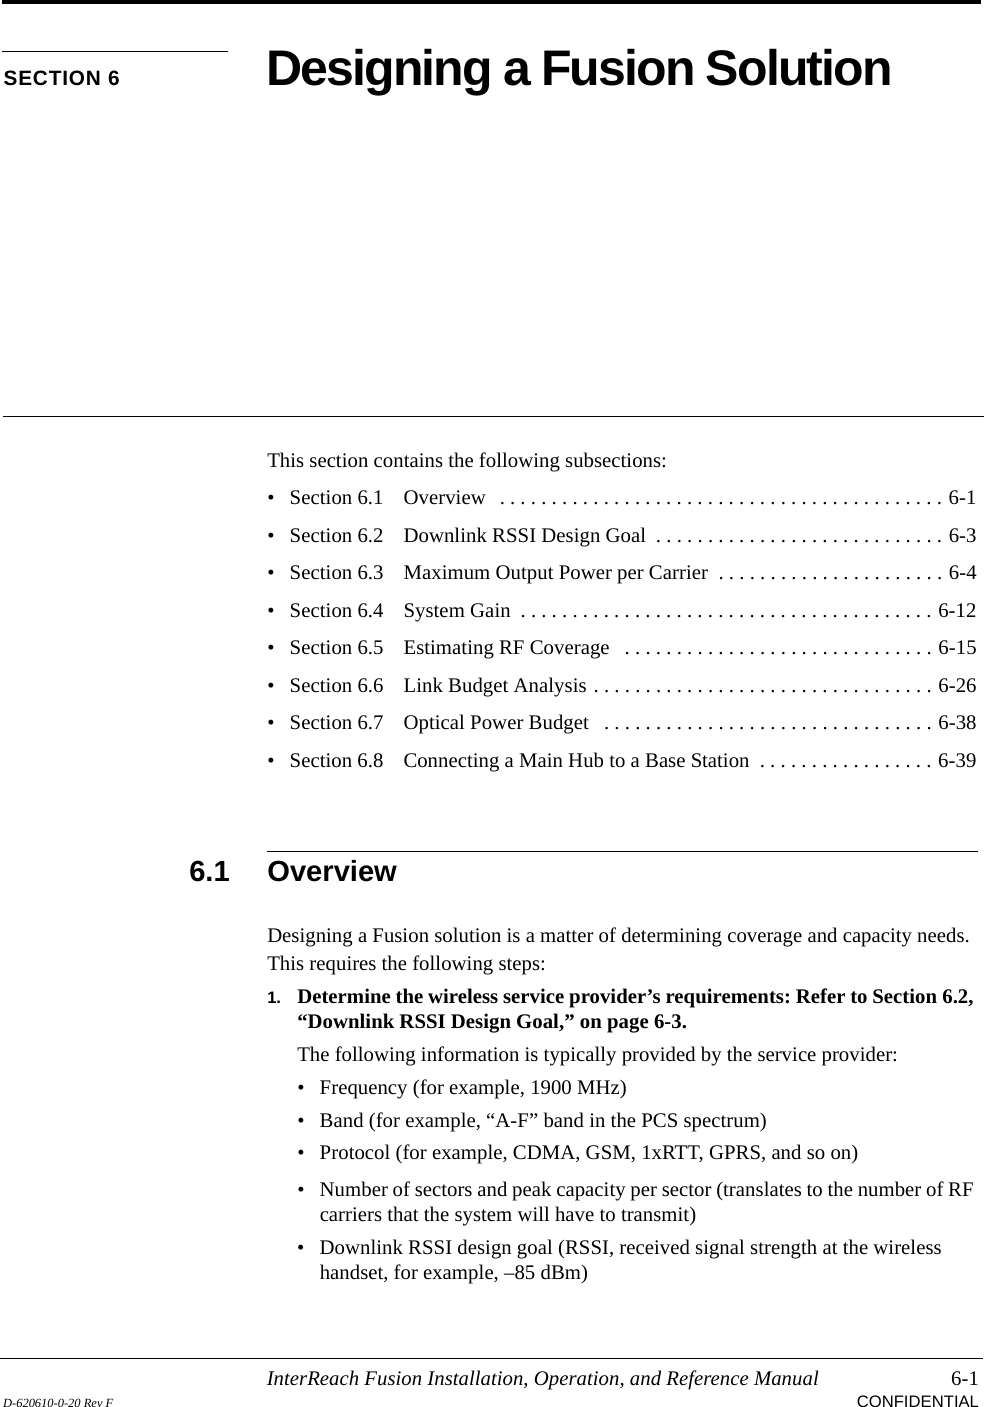 InterReach Fusion Installation, Operation, and Reference Manual 6-1D-620610-0-20 Rev F CONFIDENTIALSECTION 6 Designing a Fusion SolutionThis section contains the following subsections:• Section 6.1   Overview   . . . . . . . . . . . . . . . . . . . . . . . . . . . . . . . . . . . . . . . . . . . 6-1• Section 6.2   Downlink RSSI Design Goal  . . . . . . . . . . . . . . . . . . . . . . . . . . . . 6-3• Section 6.3   Maximum Output Power per Carrier  . . . . . . . . . . . . . . . . . . . . . . 6-4• Section 6.4   System Gain  . . . . . . . . . . . . . . . . . . . . . . . . . . . . . . . . . . . . . . . . 6-12• Section 6.5   Estimating RF Coverage   . . . . . . . . . . . . . . . . . . . . . . . . . . . . . . 6-15• Section 6.6   Link Budget Analysis . . . . . . . . . . . . . . . . . . . . . . . . . . . . . . . . . 6-26• Section 6.7   Optical Power Budget   . . . . . . . . . . . . . . . . . . . . . . . . . . . . . . . . 6-38• Section 6.8   Connecting a Main Hub to a Base Station  . . . . . . . . . . . . . . . . . 6-396.1 OverviewDesigning a Fusion solution is a matter of determining coverage and capacity needs. This requires the following steps:1. Determine the wireless service provider’s requirements: Refer to Section 6.2, “Downlink RSSI Design Goal,” on page 6-3.The following information is typically provided by the service provider:• Frequency (for example, 1900 MHz)• Band (for example, “A-F” band in the PCS spectrum)• Protocol (for example, CDMA, GSM, 1xRTT, GPRS, and so on)• Number of sectors and peak capacity per sector (translates to the number of RF carriers that the system will have to transmit)• Downlink RSSI design goal (RSSI, received signal strength at the wireless handset, for example, –85 dBm)